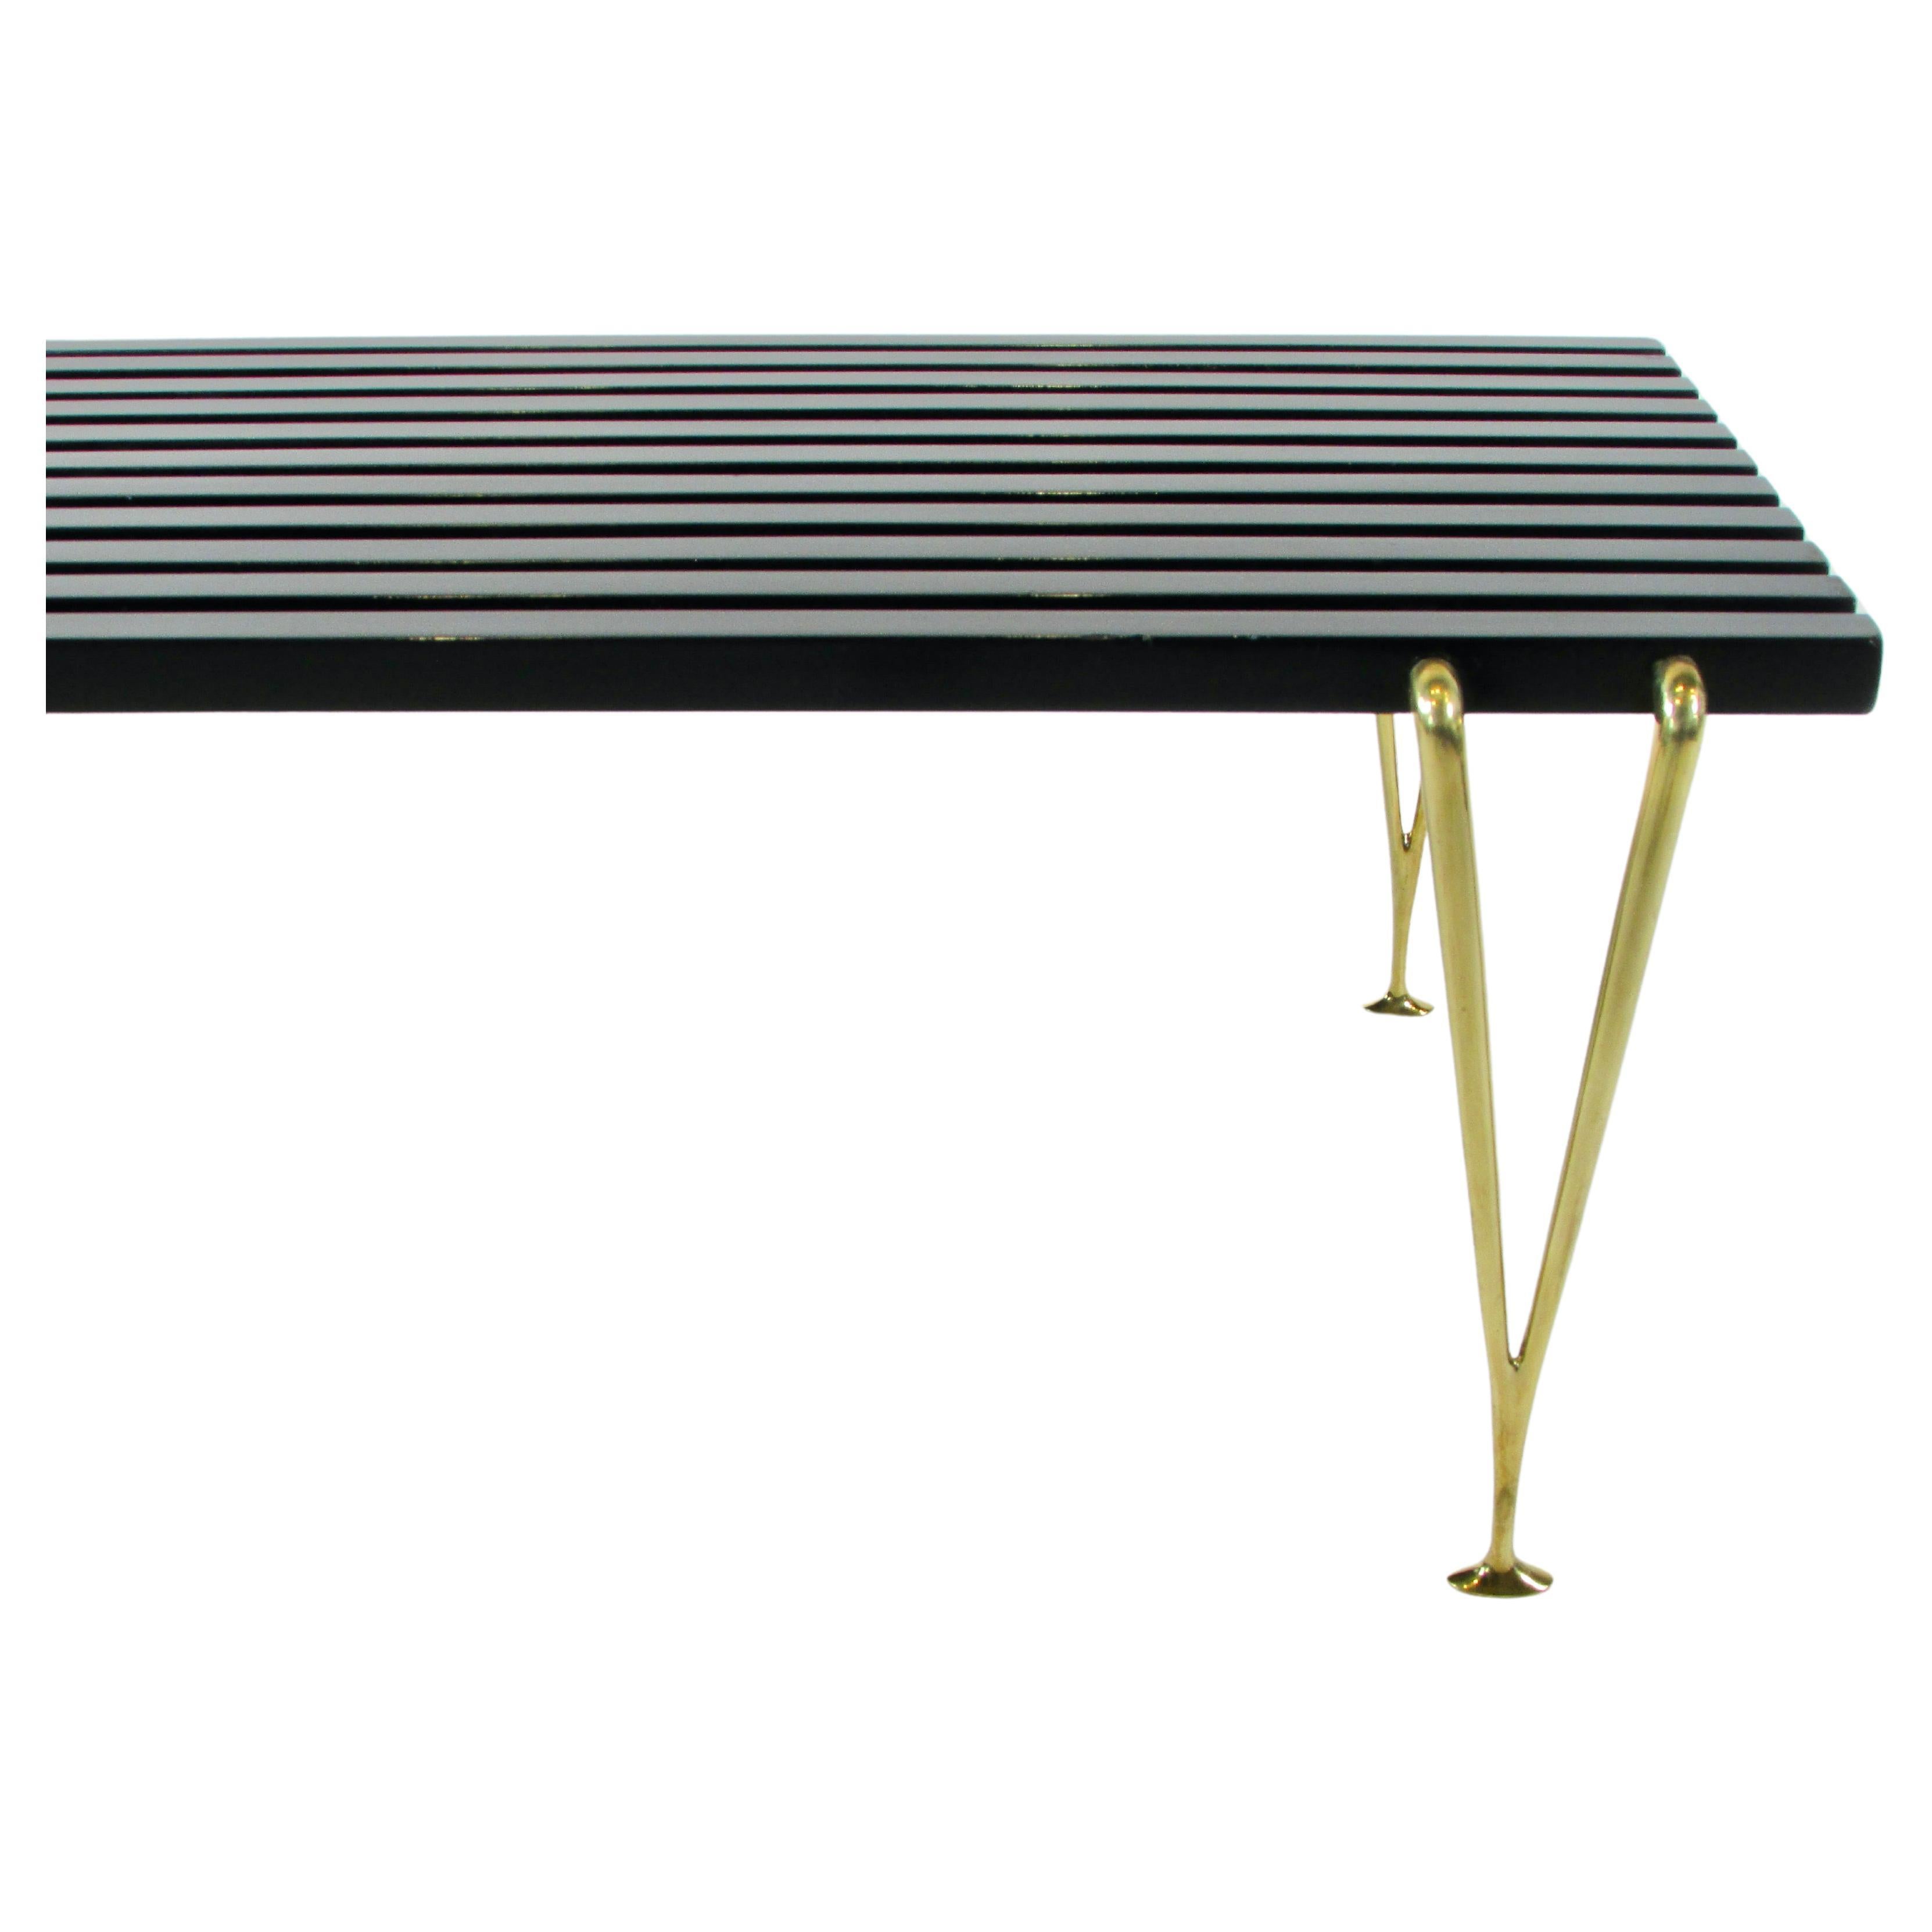 Hugh Acton black slatted cocktail table or bench on brass legs 